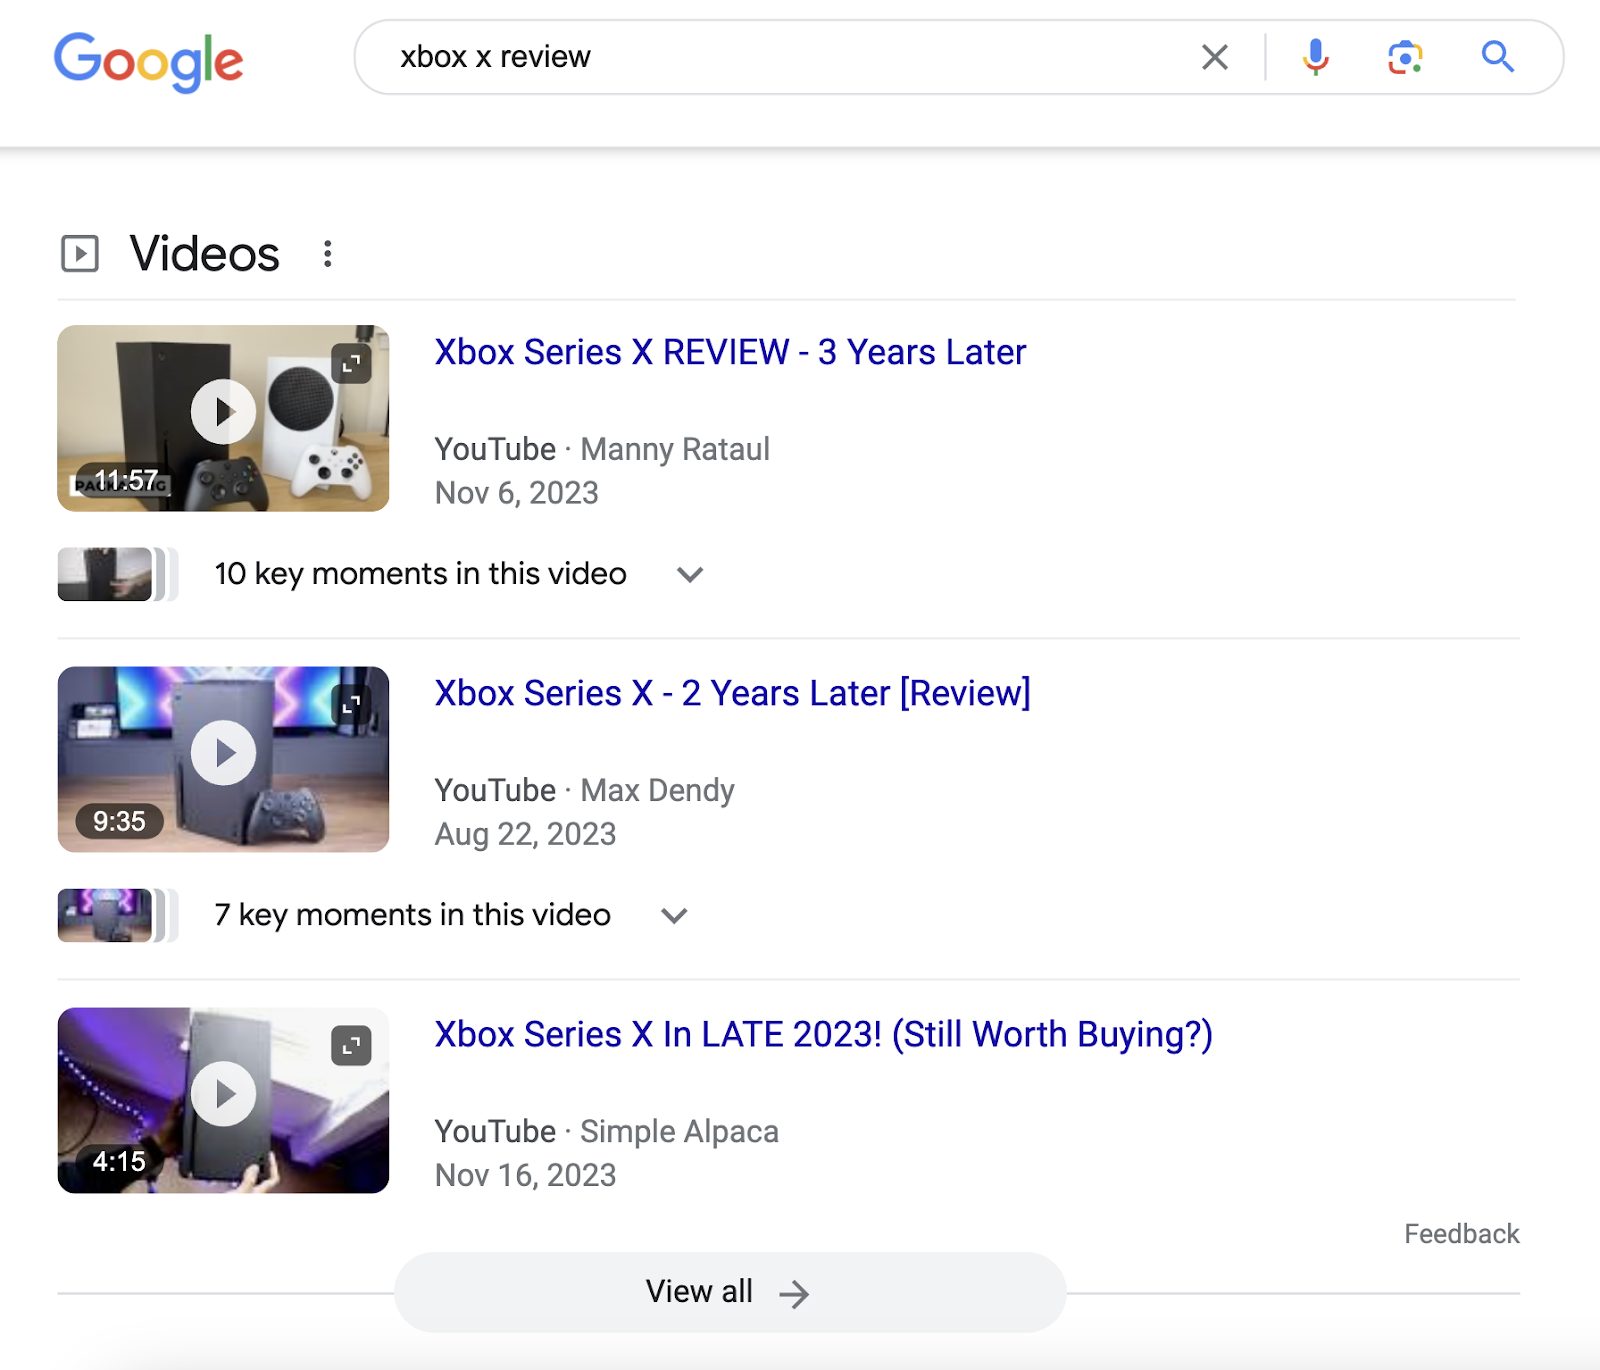 "Videos" section on Google SERP for "xbox x review" query